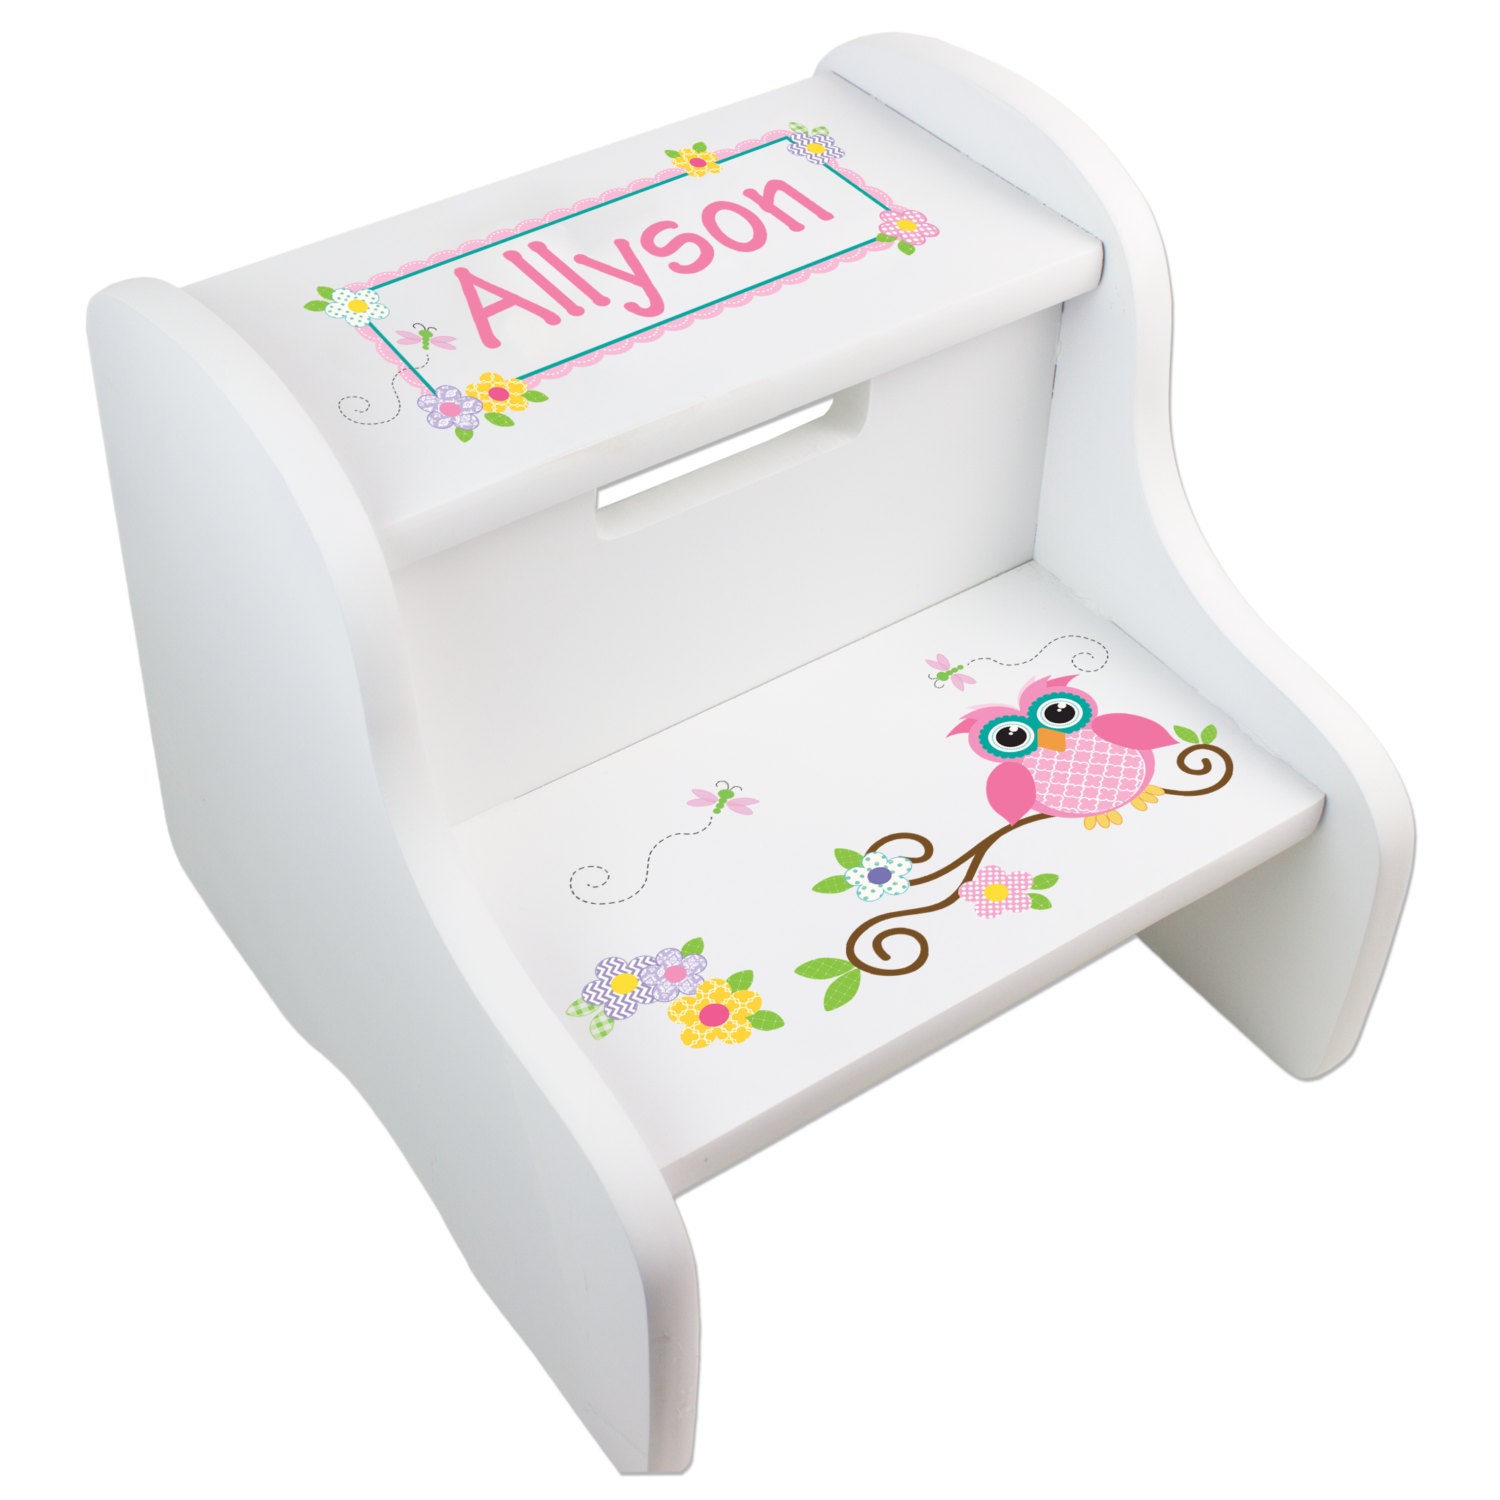 Personalized Children's Owl Step Stool for Hoot by MyBambino